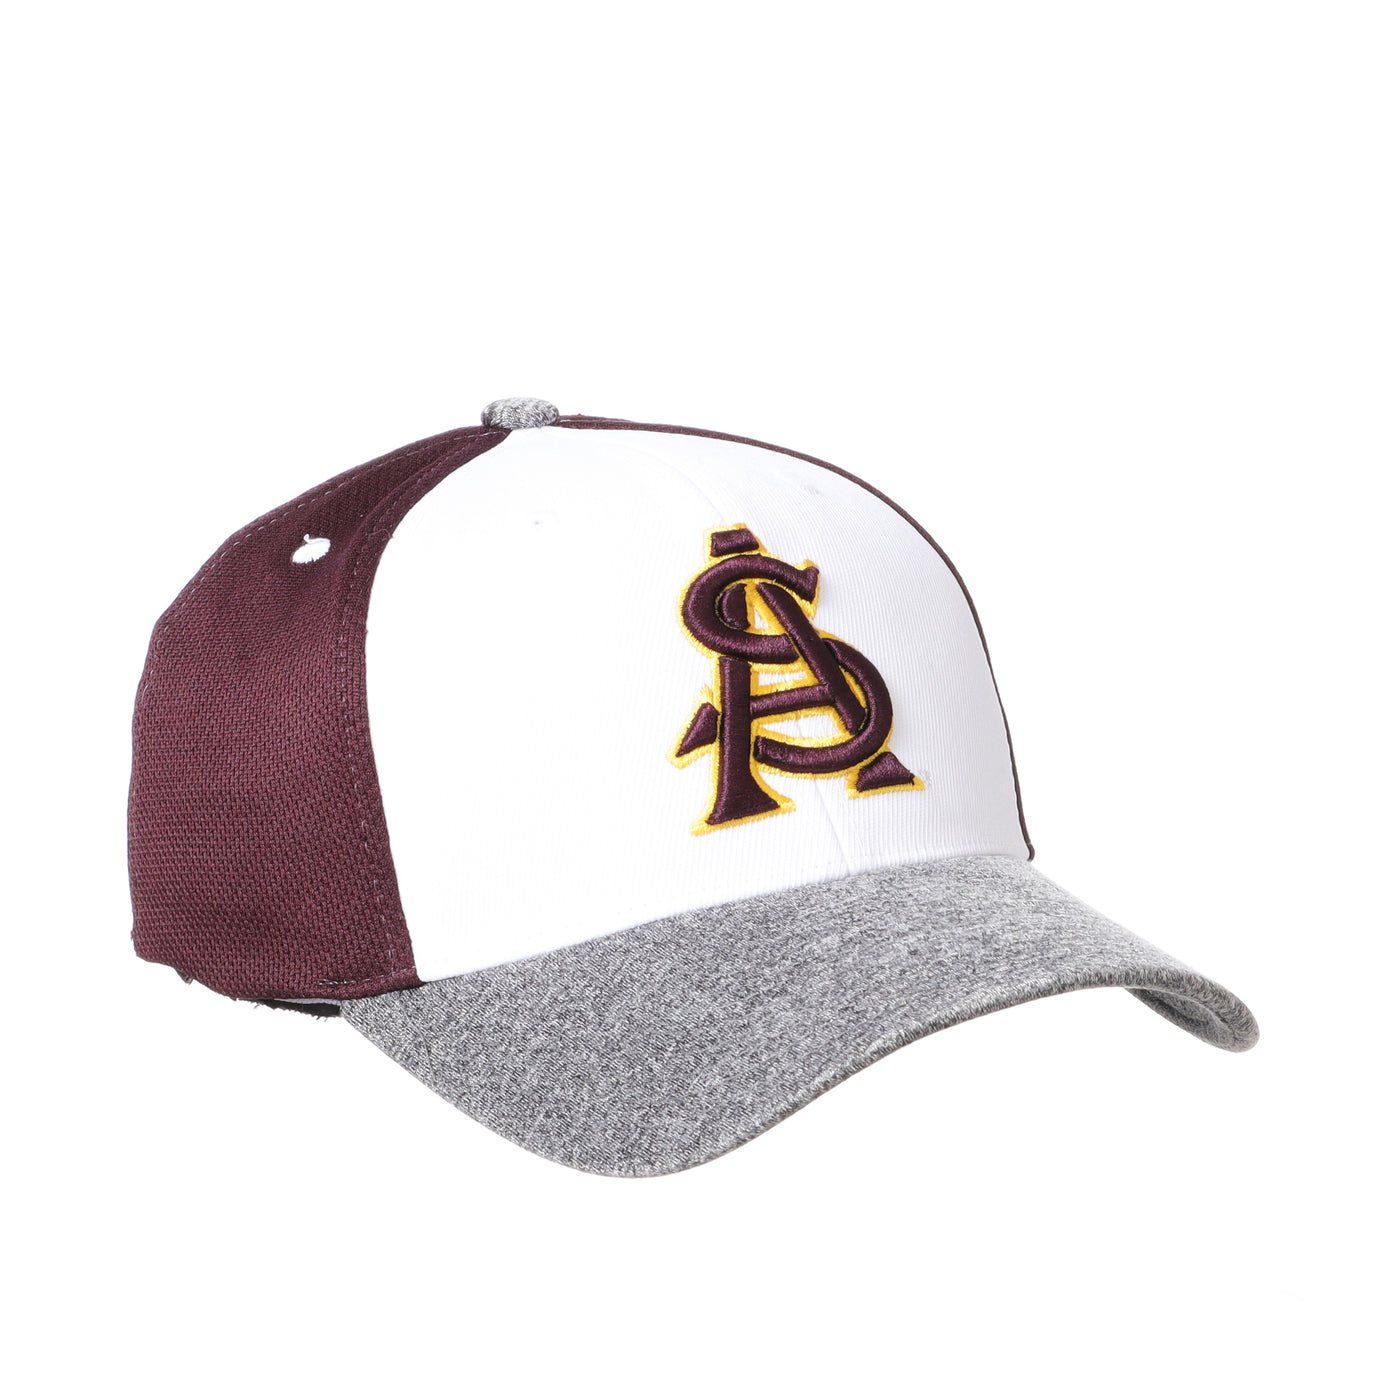 Side view of ASU youth stretch fit hat in white, maroon, and gray with interlocking 'A' and 'S' in maroon and gold embroidered lettering